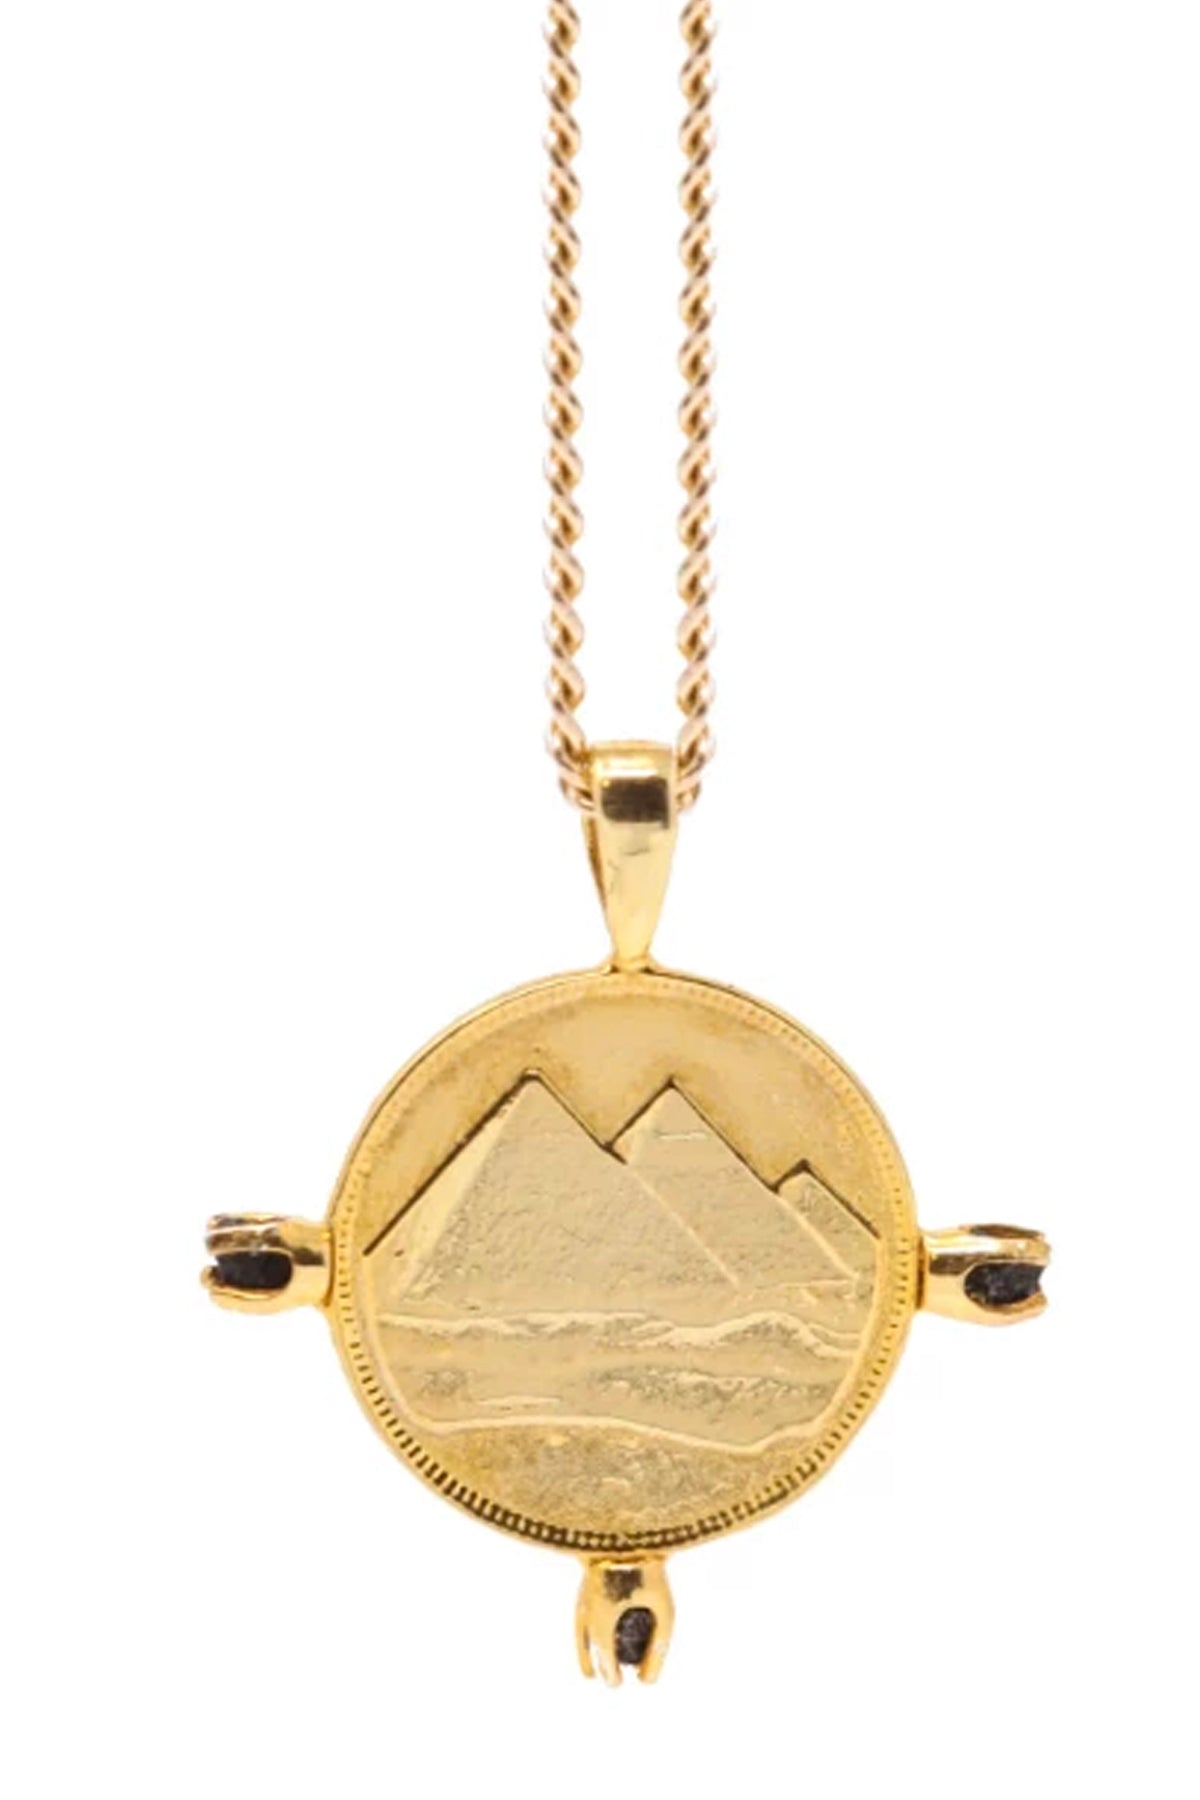 THE ALIGN PYRAMID Coin Necklace & Raw Black Diamonds - ShopAuthentique